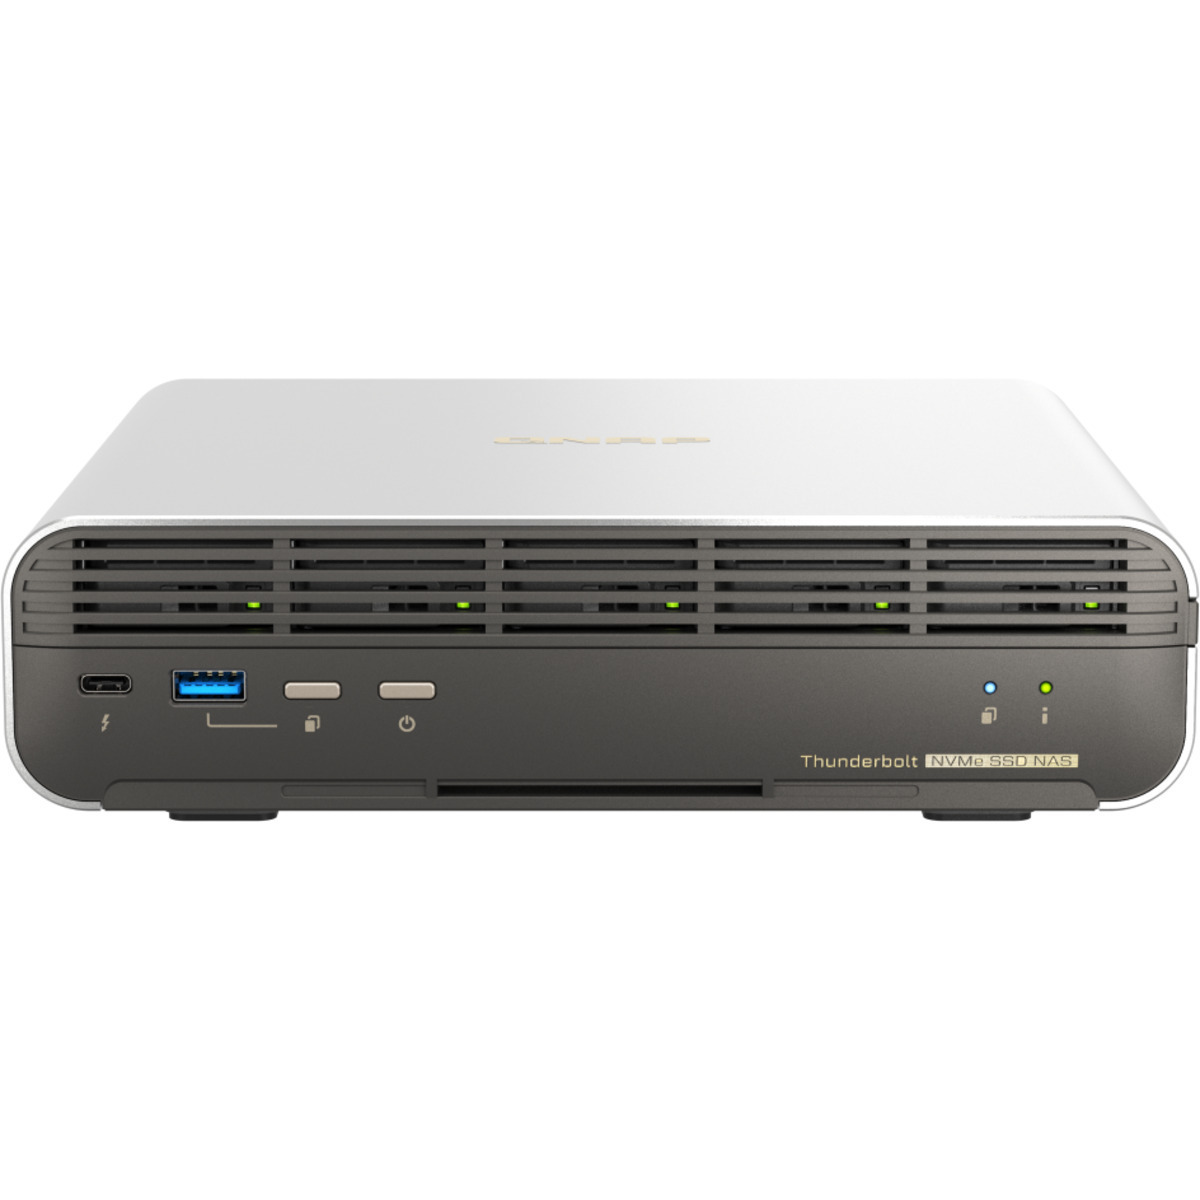 QNAP TBS-h574TX Core i3 Thunderbolt 4 8tb 5-Bay Desktop Multimedia / Power User / Business DAS-NAS - Combo Direct + Network Storage Device 4x2tb Crucial P3 Plus CT2000P3PSSD8  5000/4200MB/s M.2 2280 NVMe SSD CONSUMER Class Drives Installed - Burn-In Tested TBS-h574TX Core i3 Thunderbolt 4